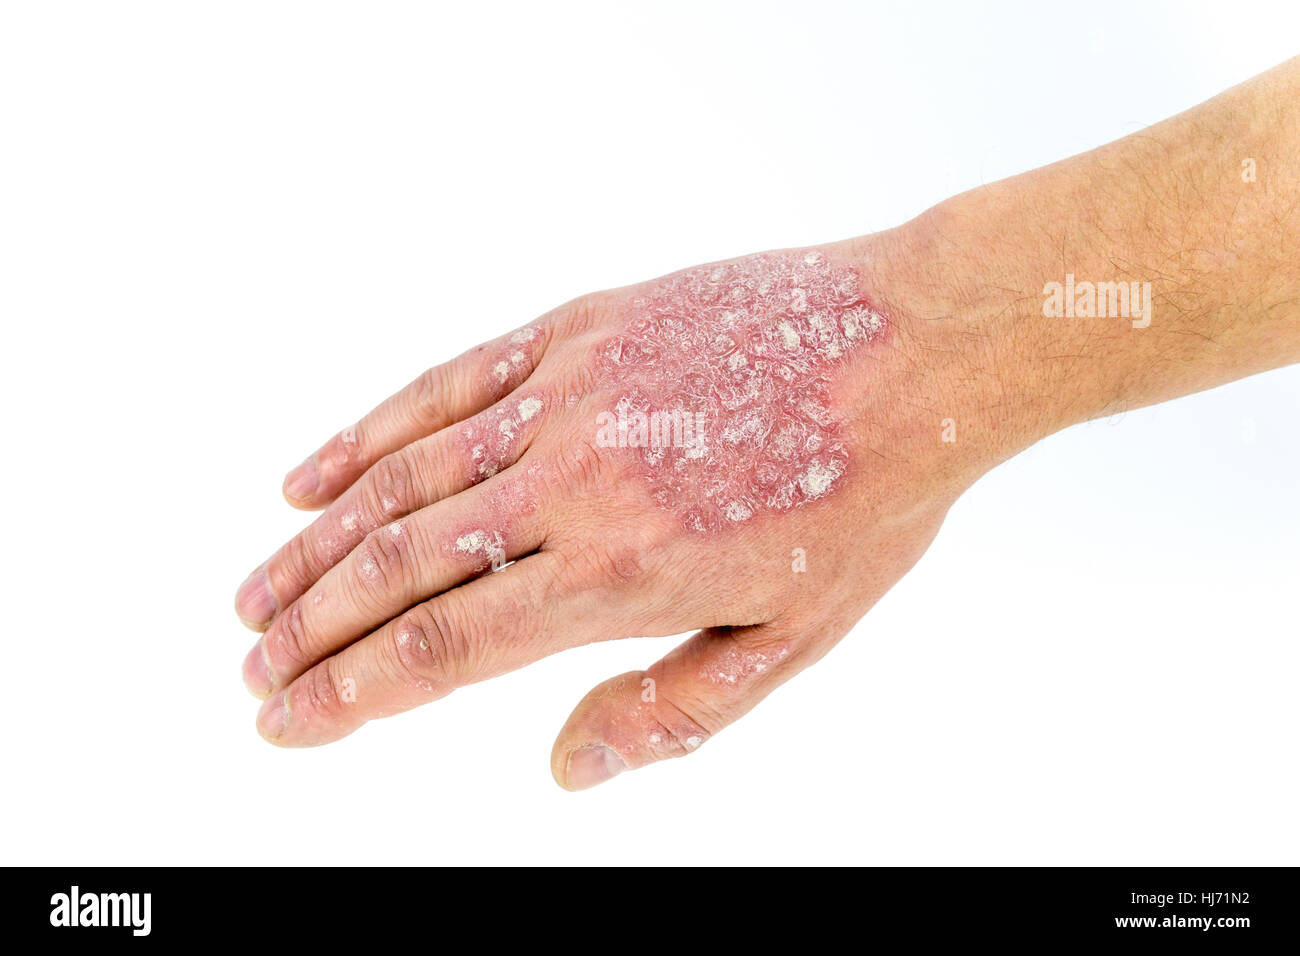 psoriasis on the hand isolated on white background Stock Photo